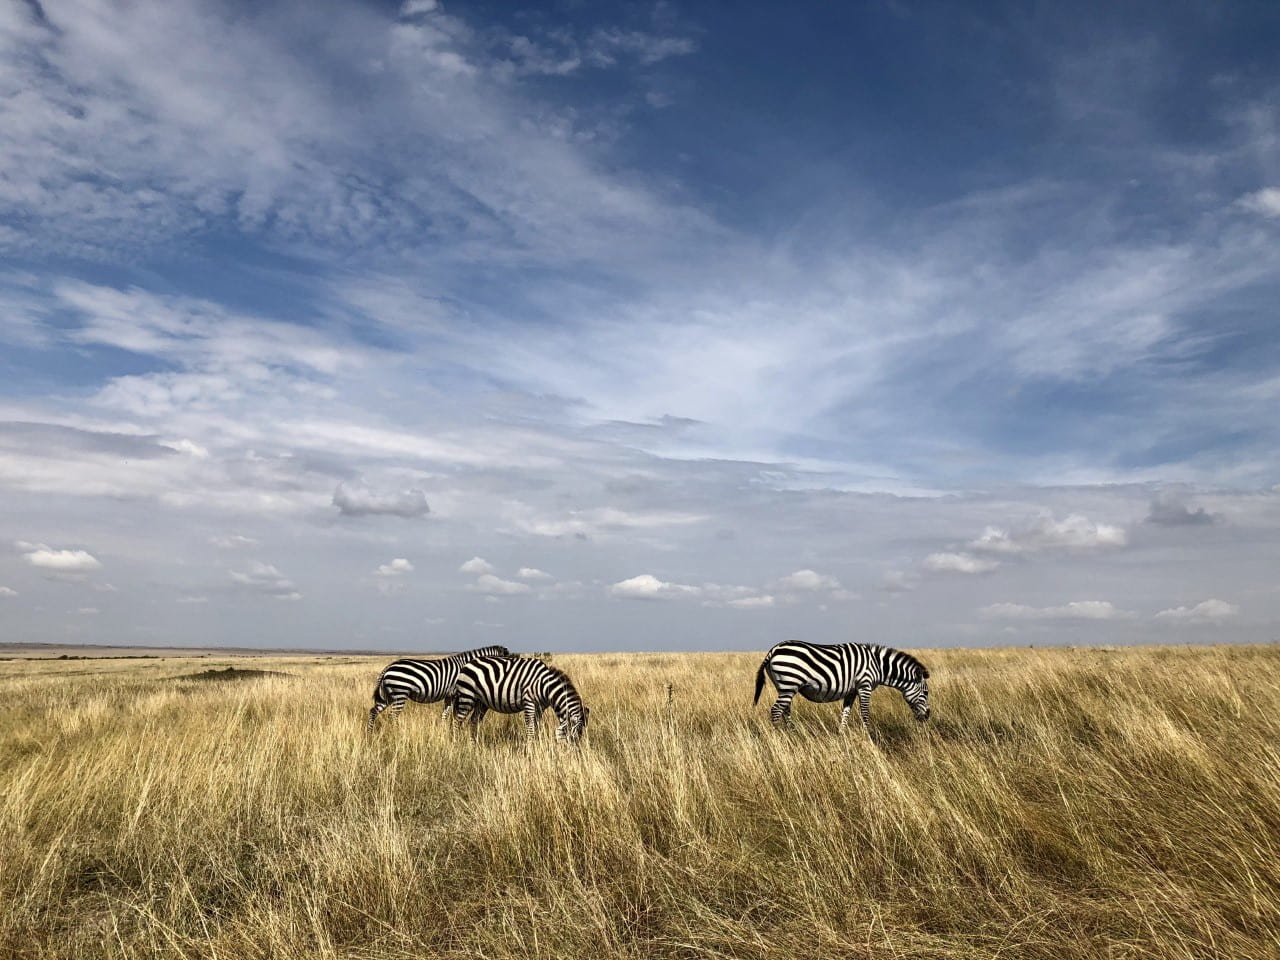 Two zebras graze in the vast Maasai Mara National Reserve where the grass and sky both seem endless. Few people are seen aside from tour guides and tourists.